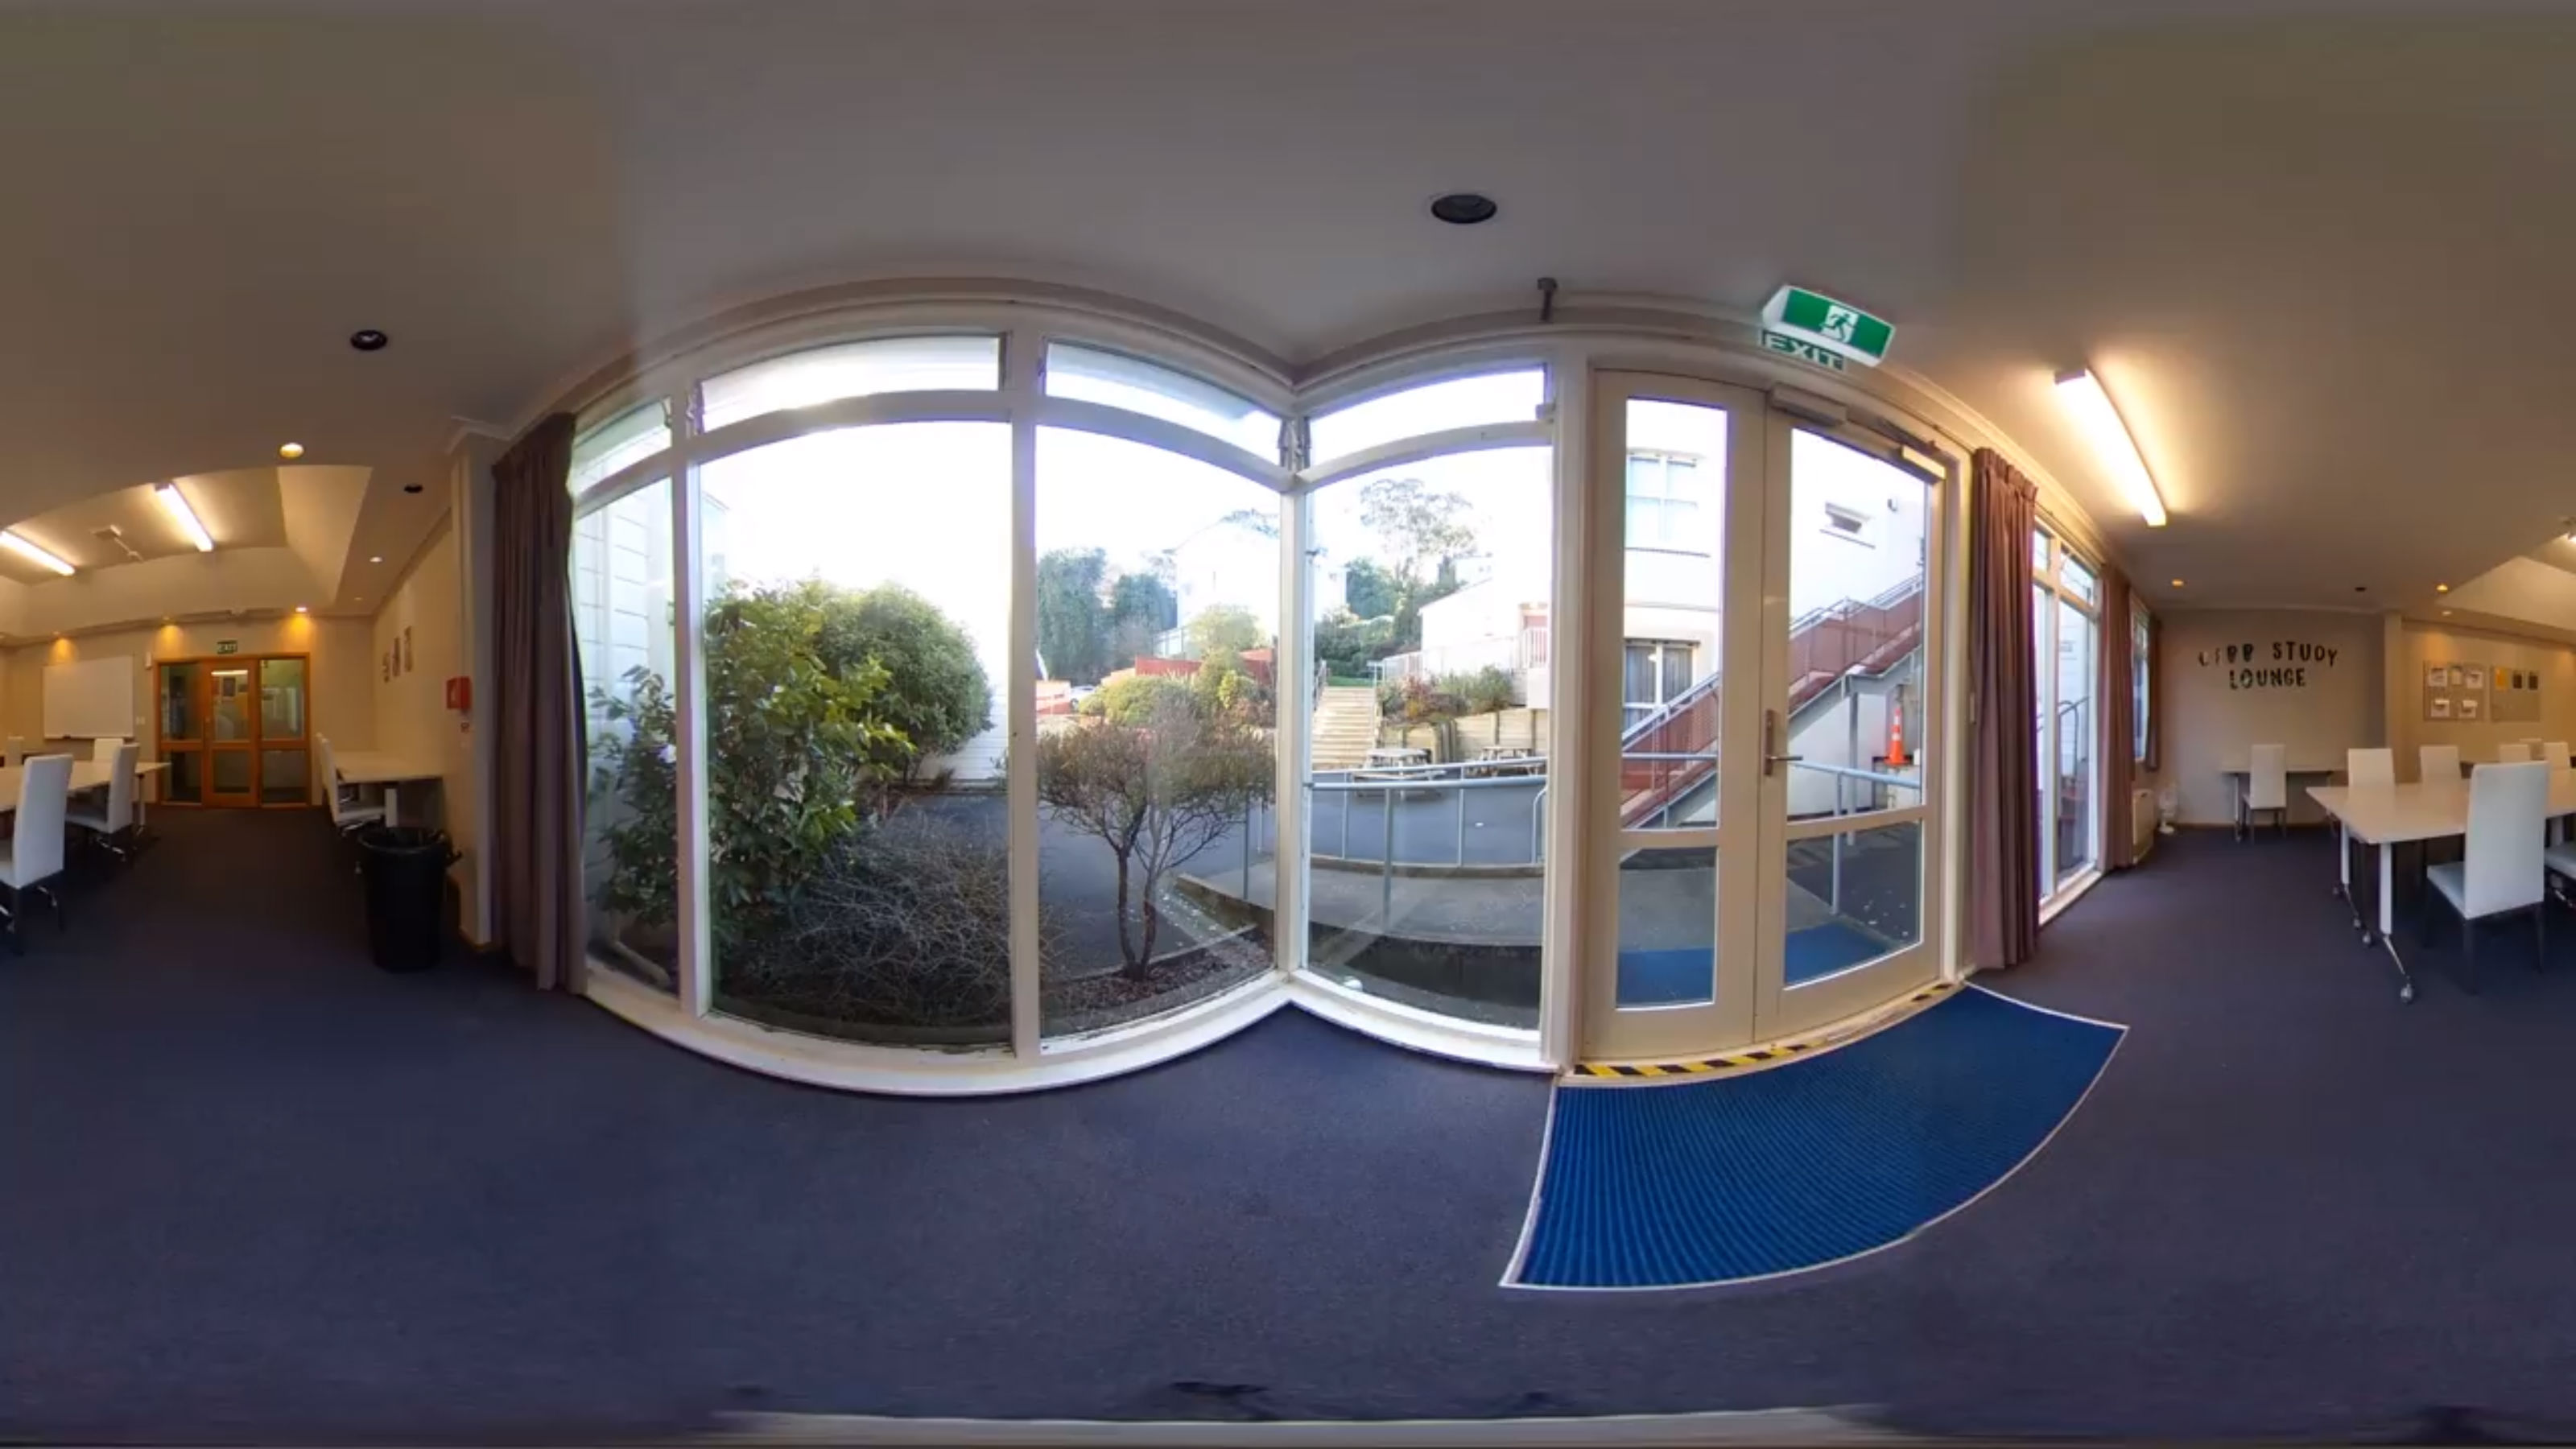 A panoramic image of a common area in Victoria House that also looks out into a courtyard.